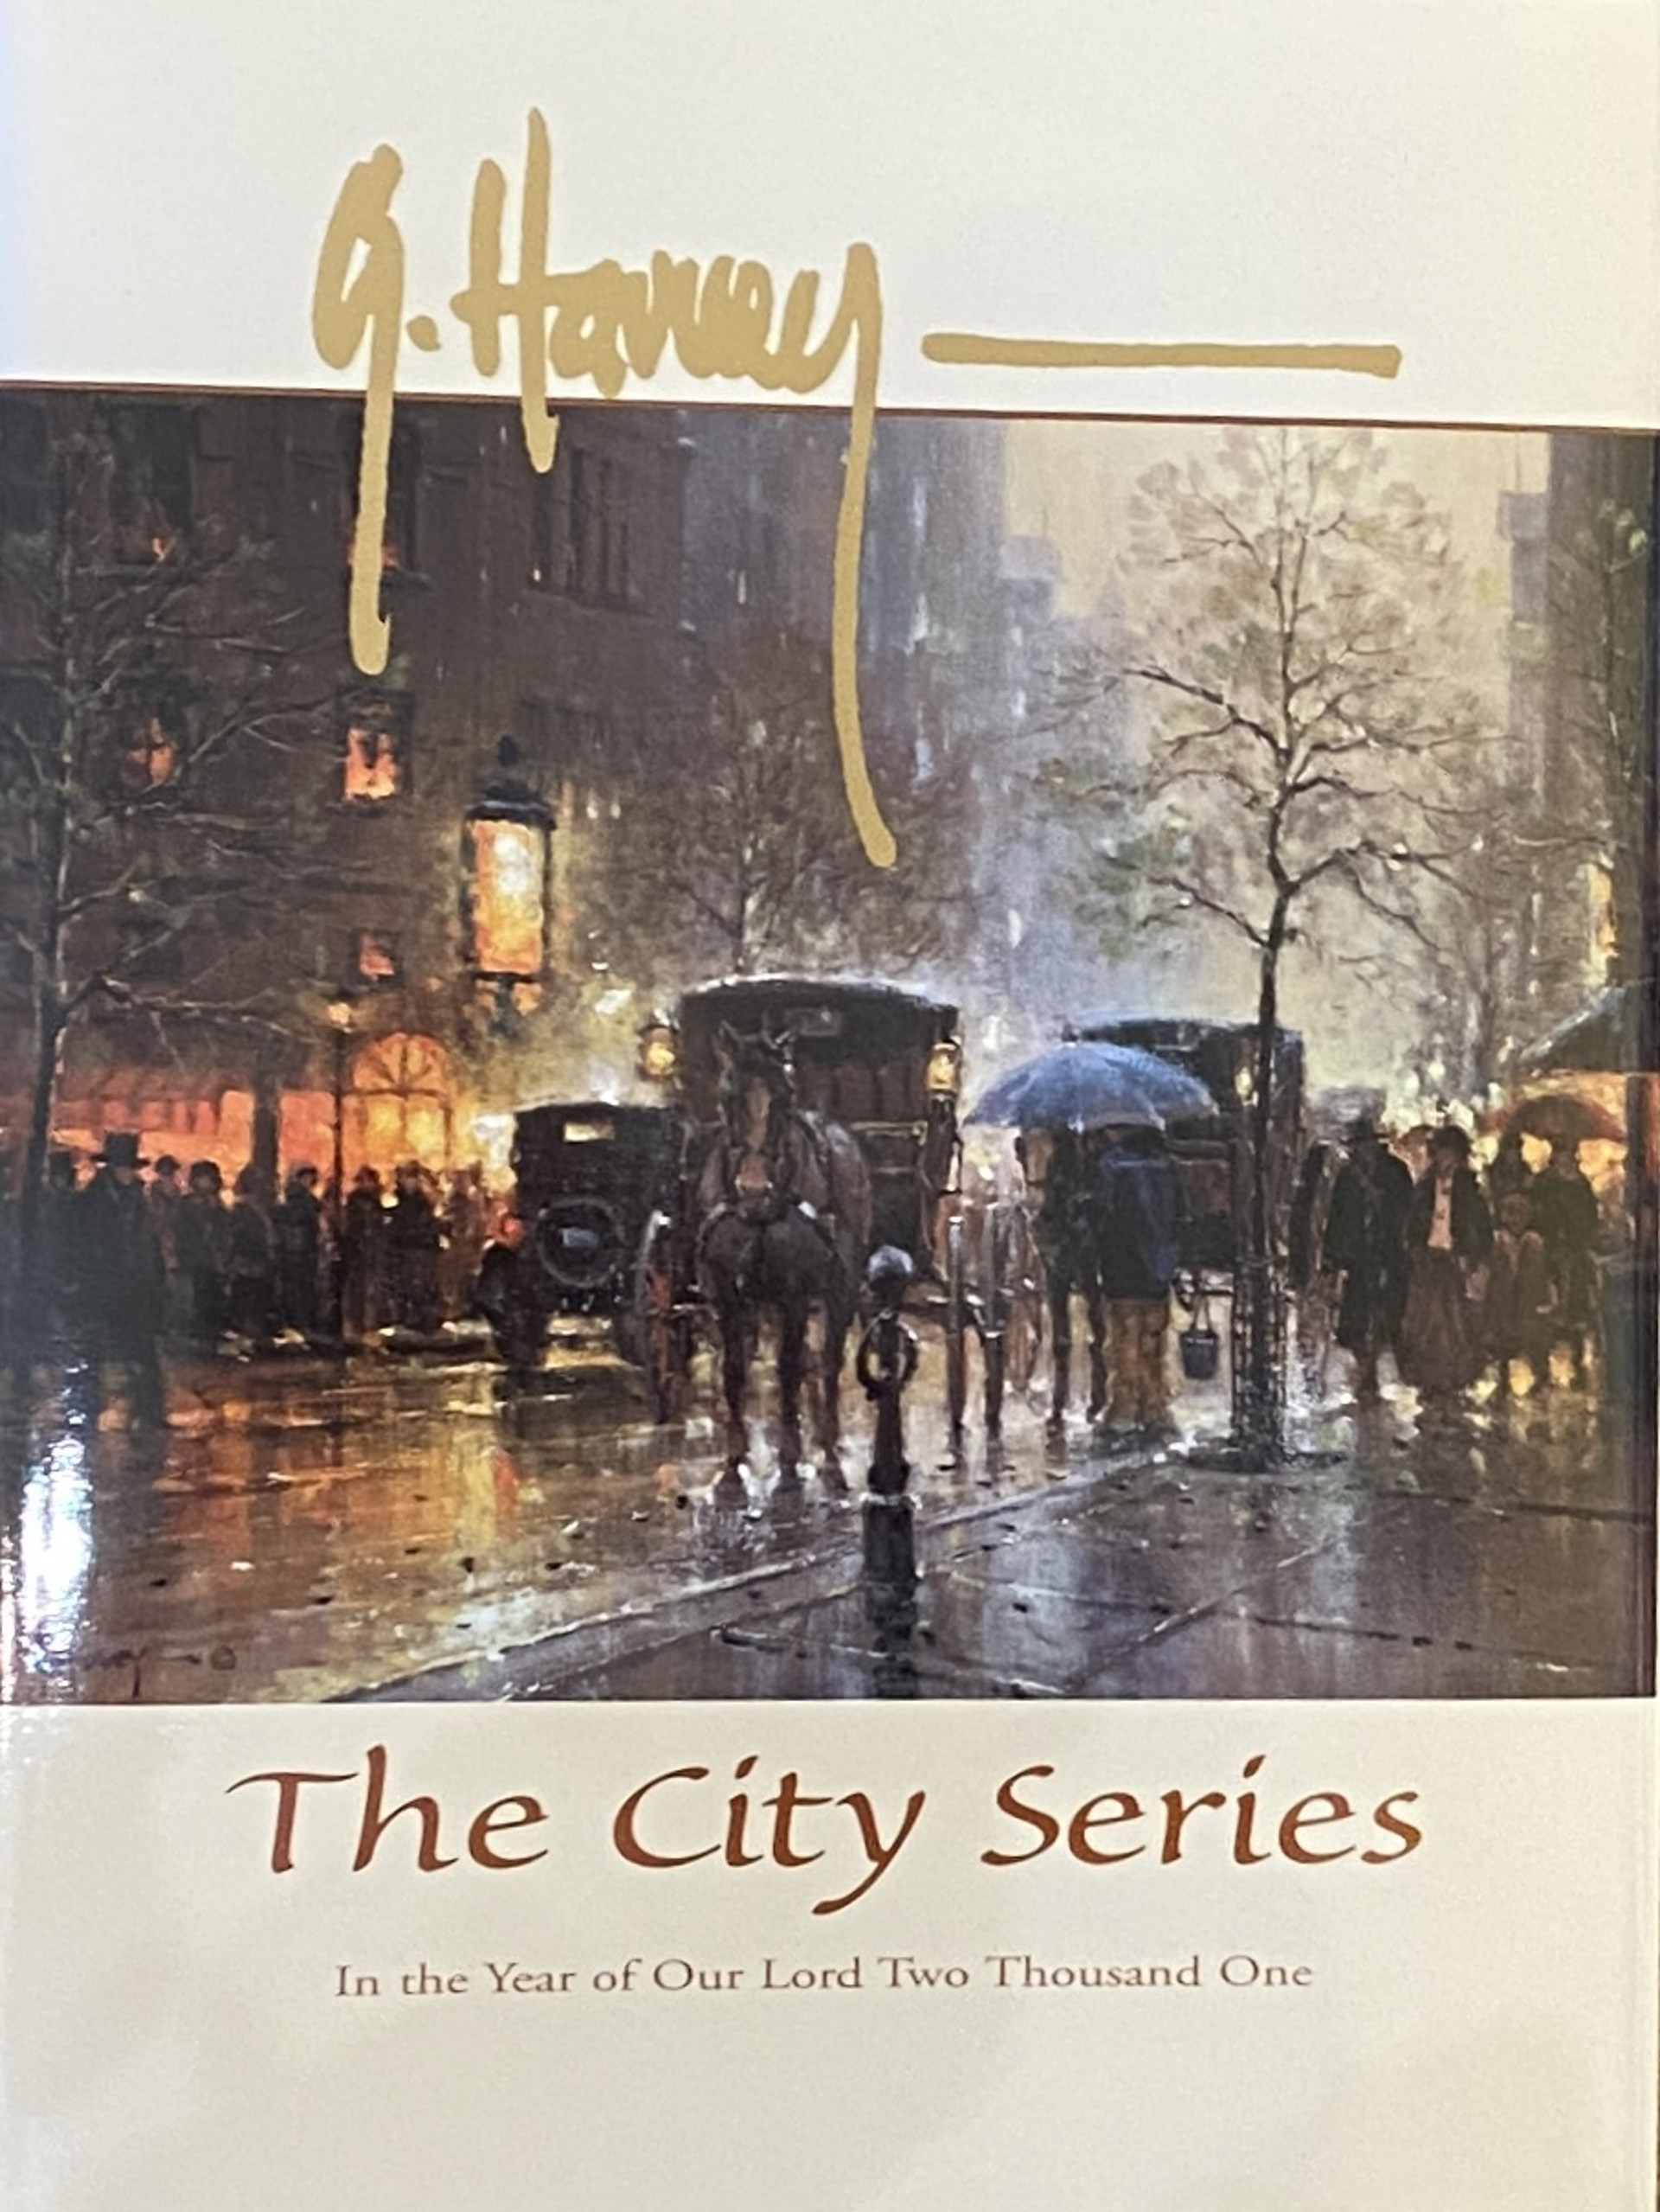 The City Series by G. Harvey